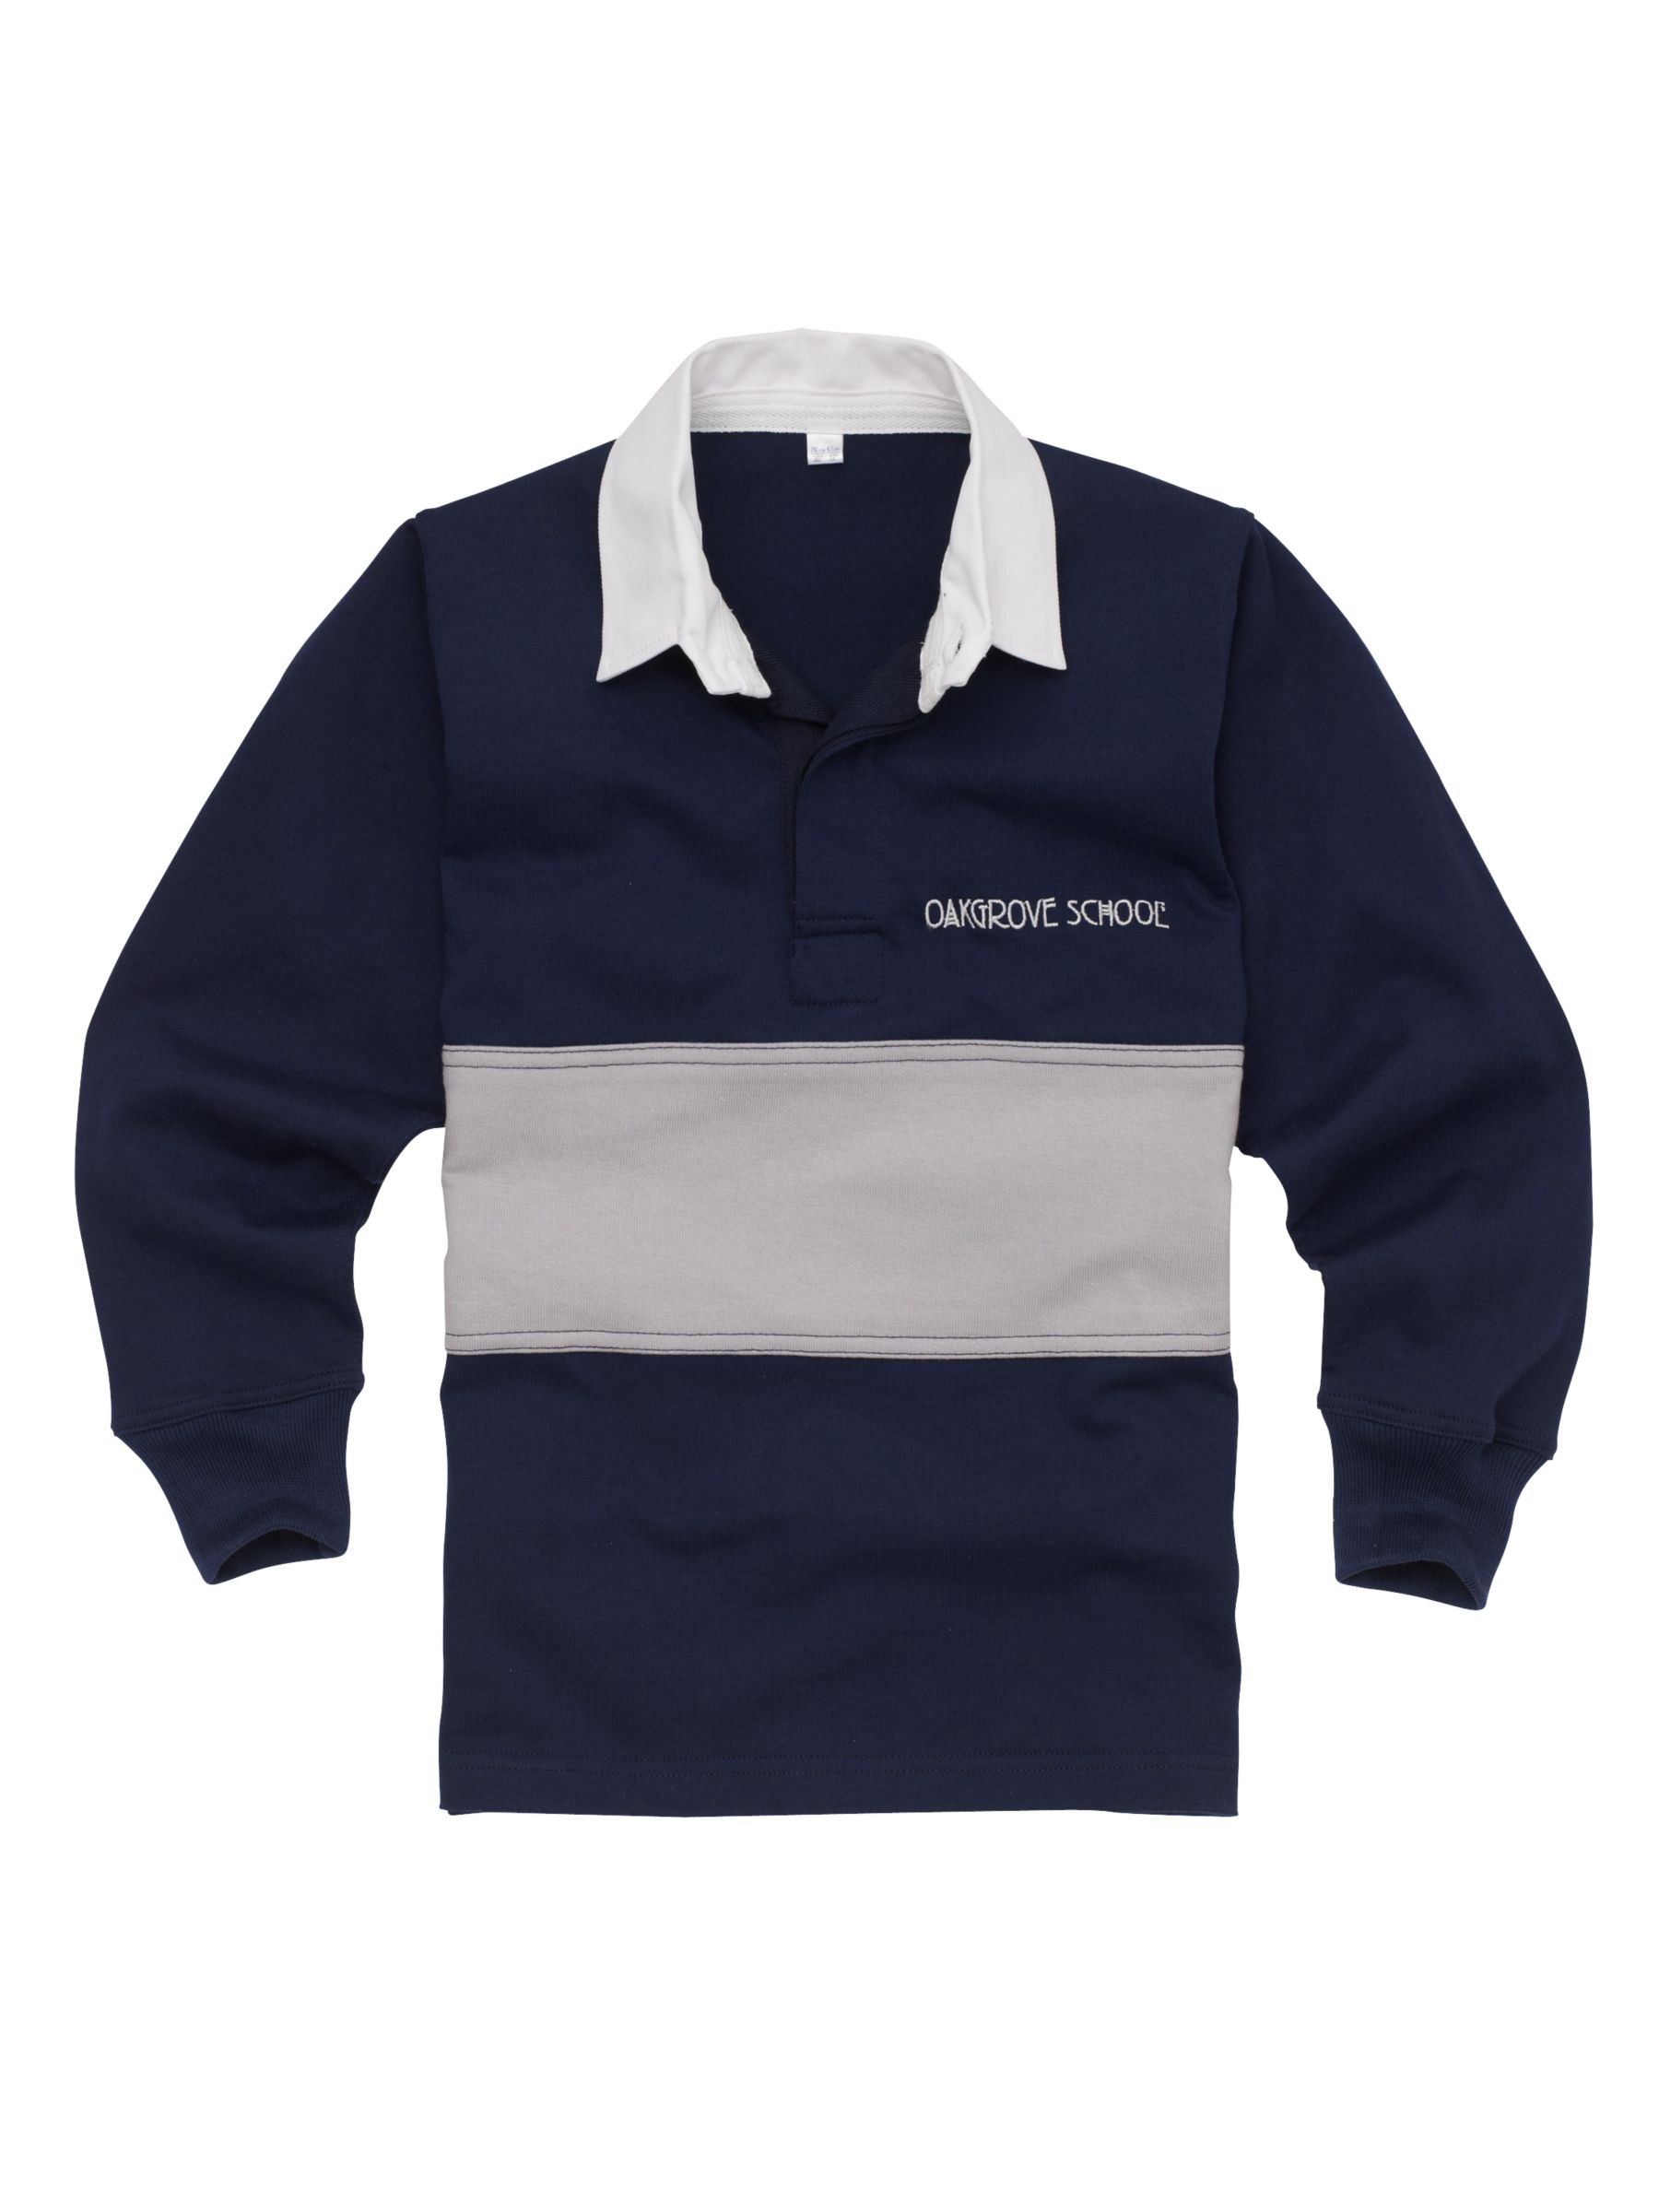 Unisex Rugby Shirt, Navy